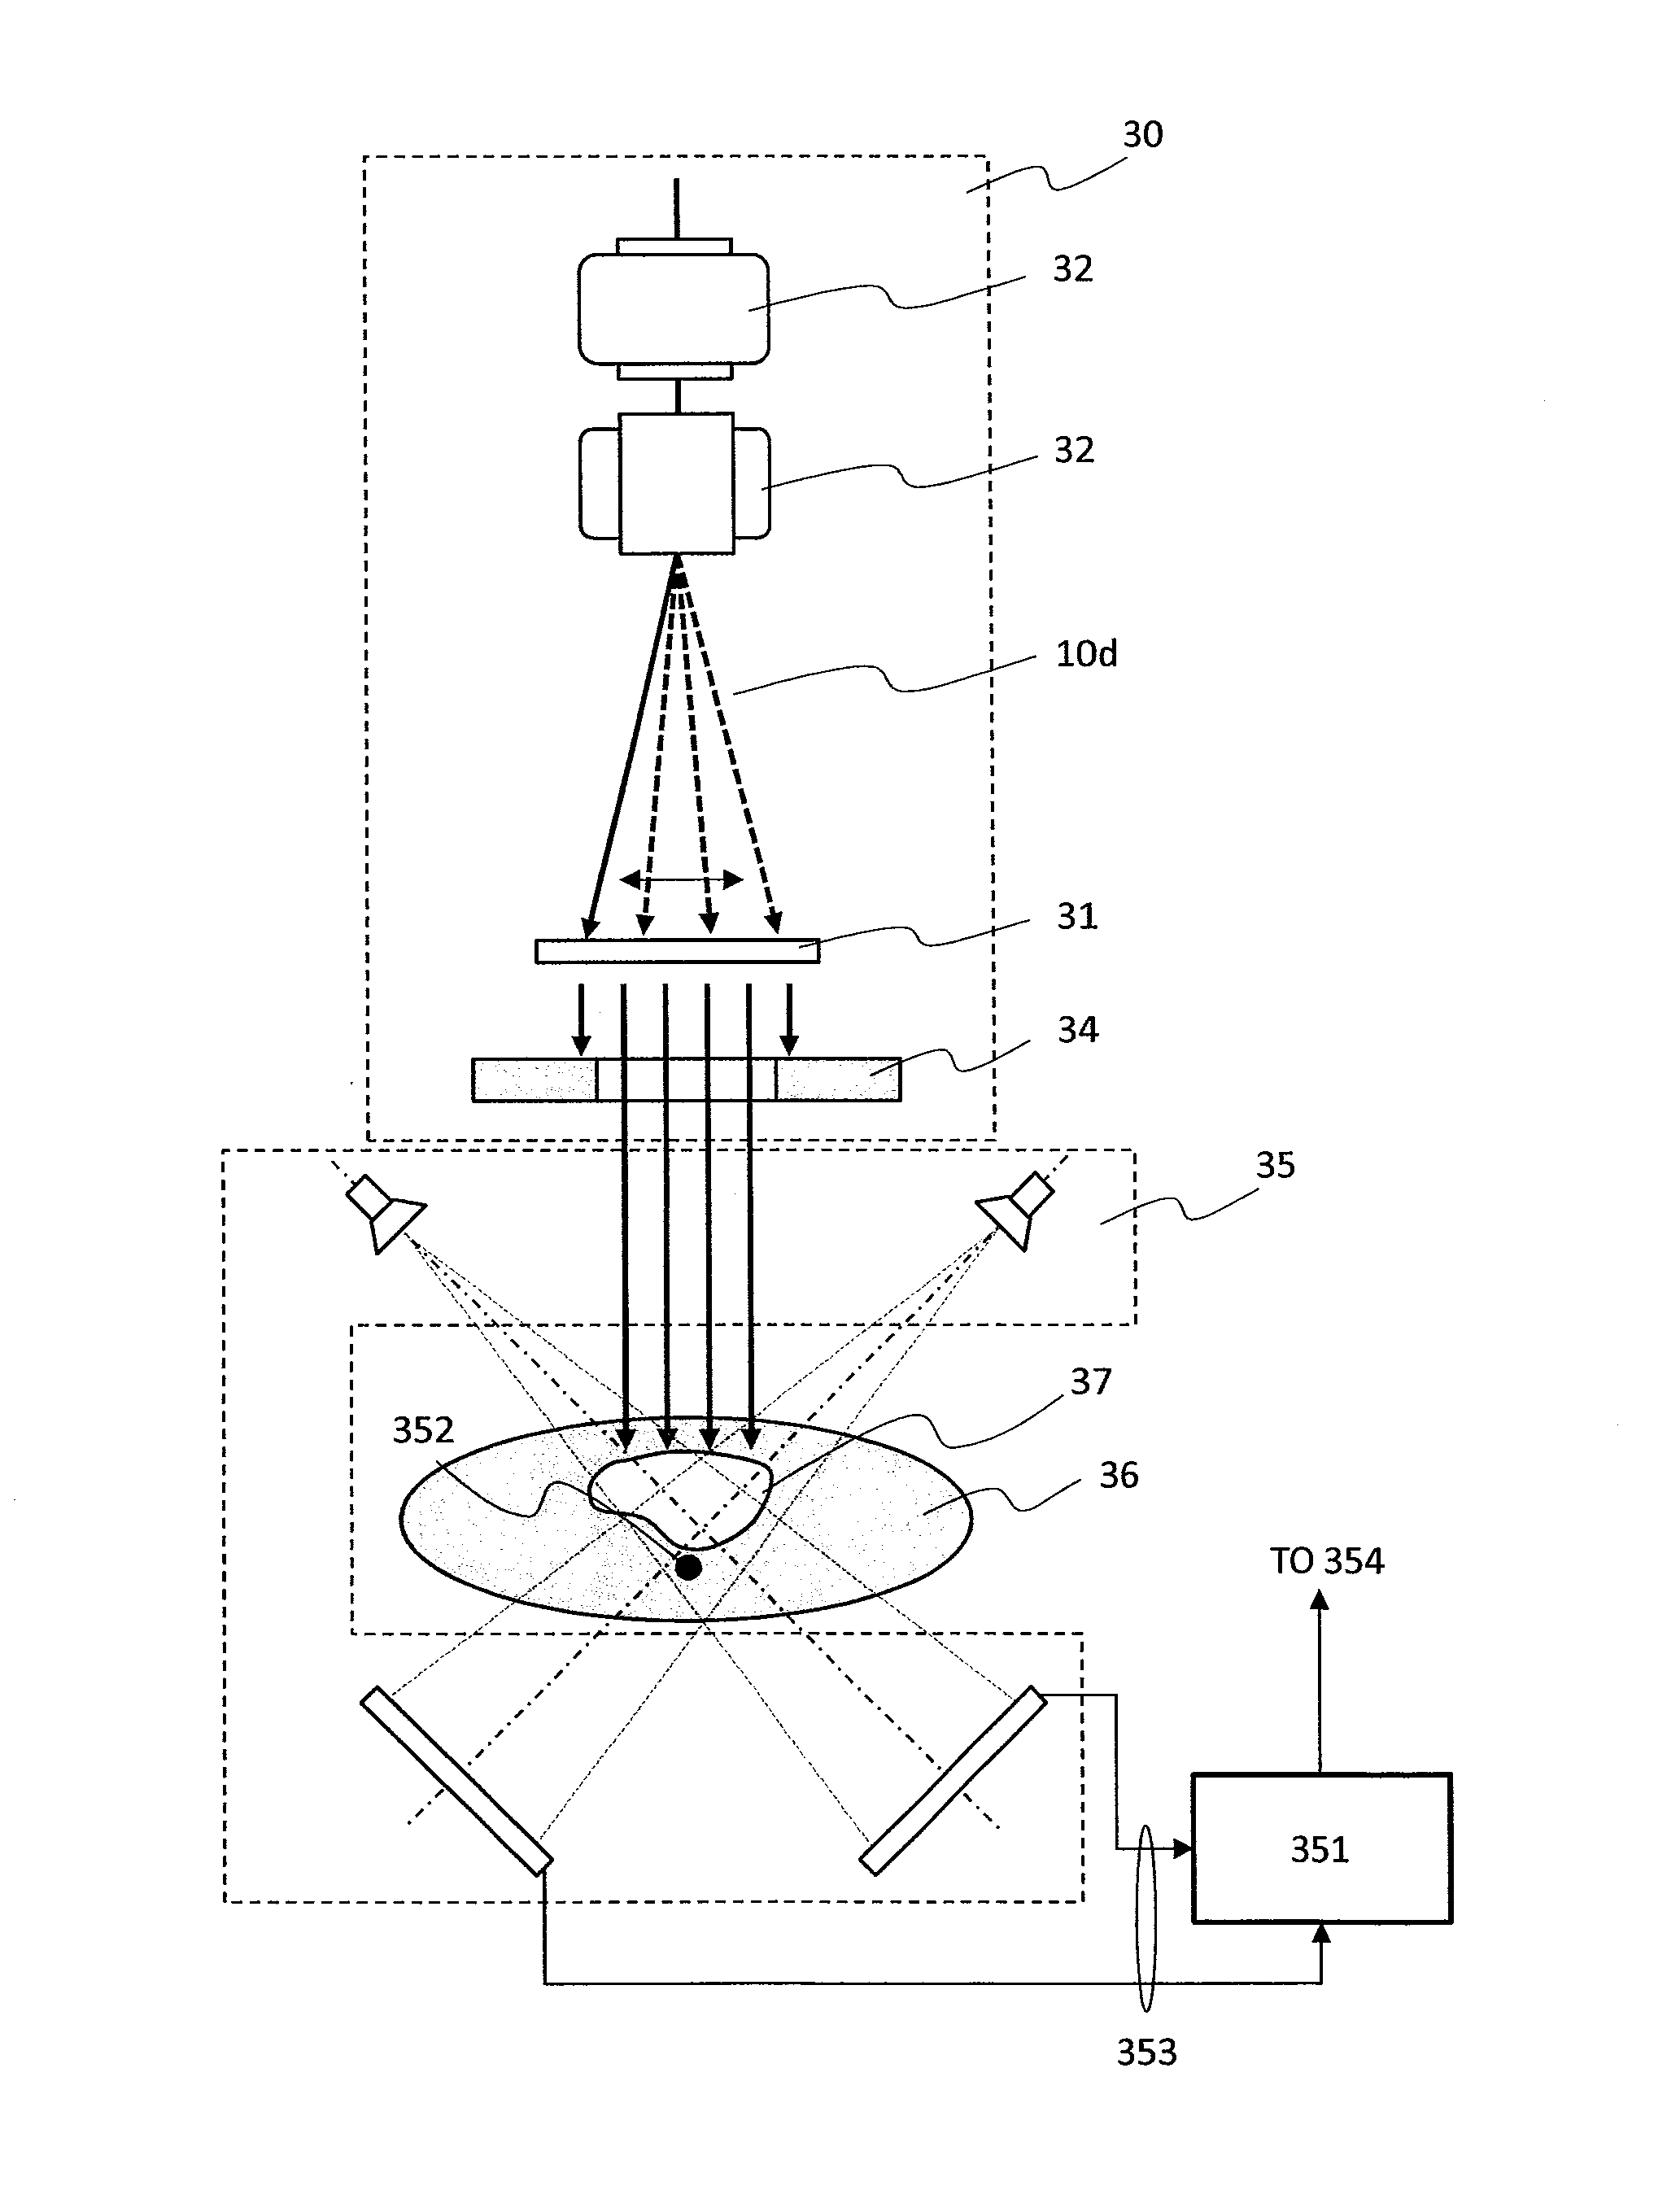 Particle beam irradiation system and method for operating the same